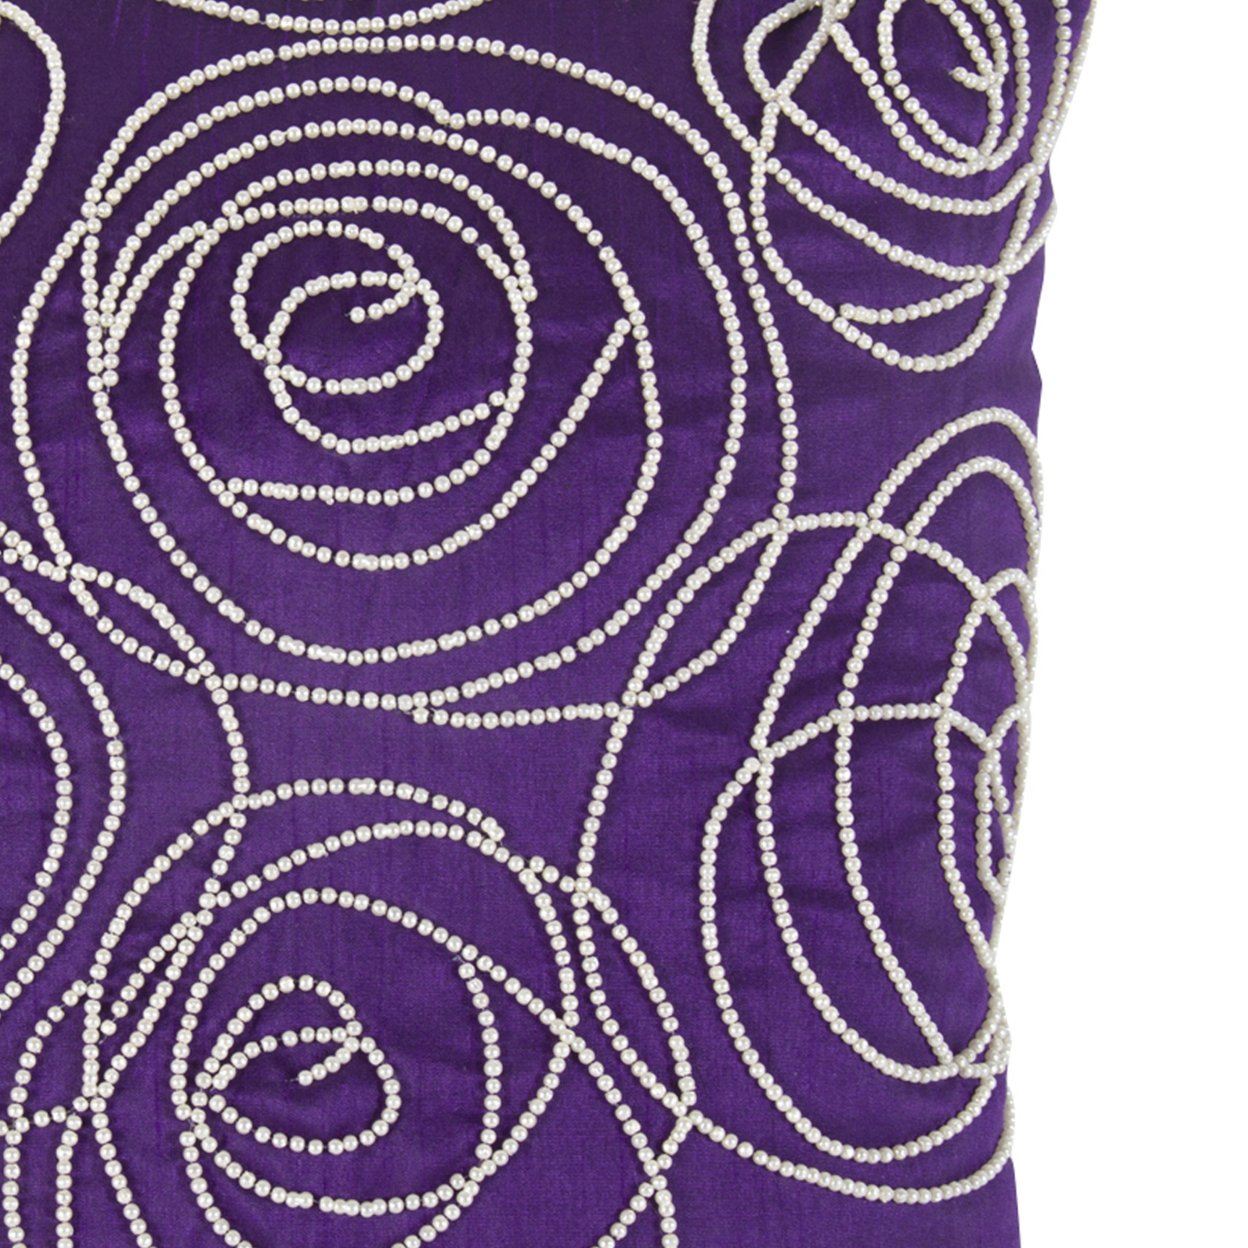 Designer Faux Silk Cotton Pillow With Pearl Beads, Purple And Silver,- Saltoro Sherpi